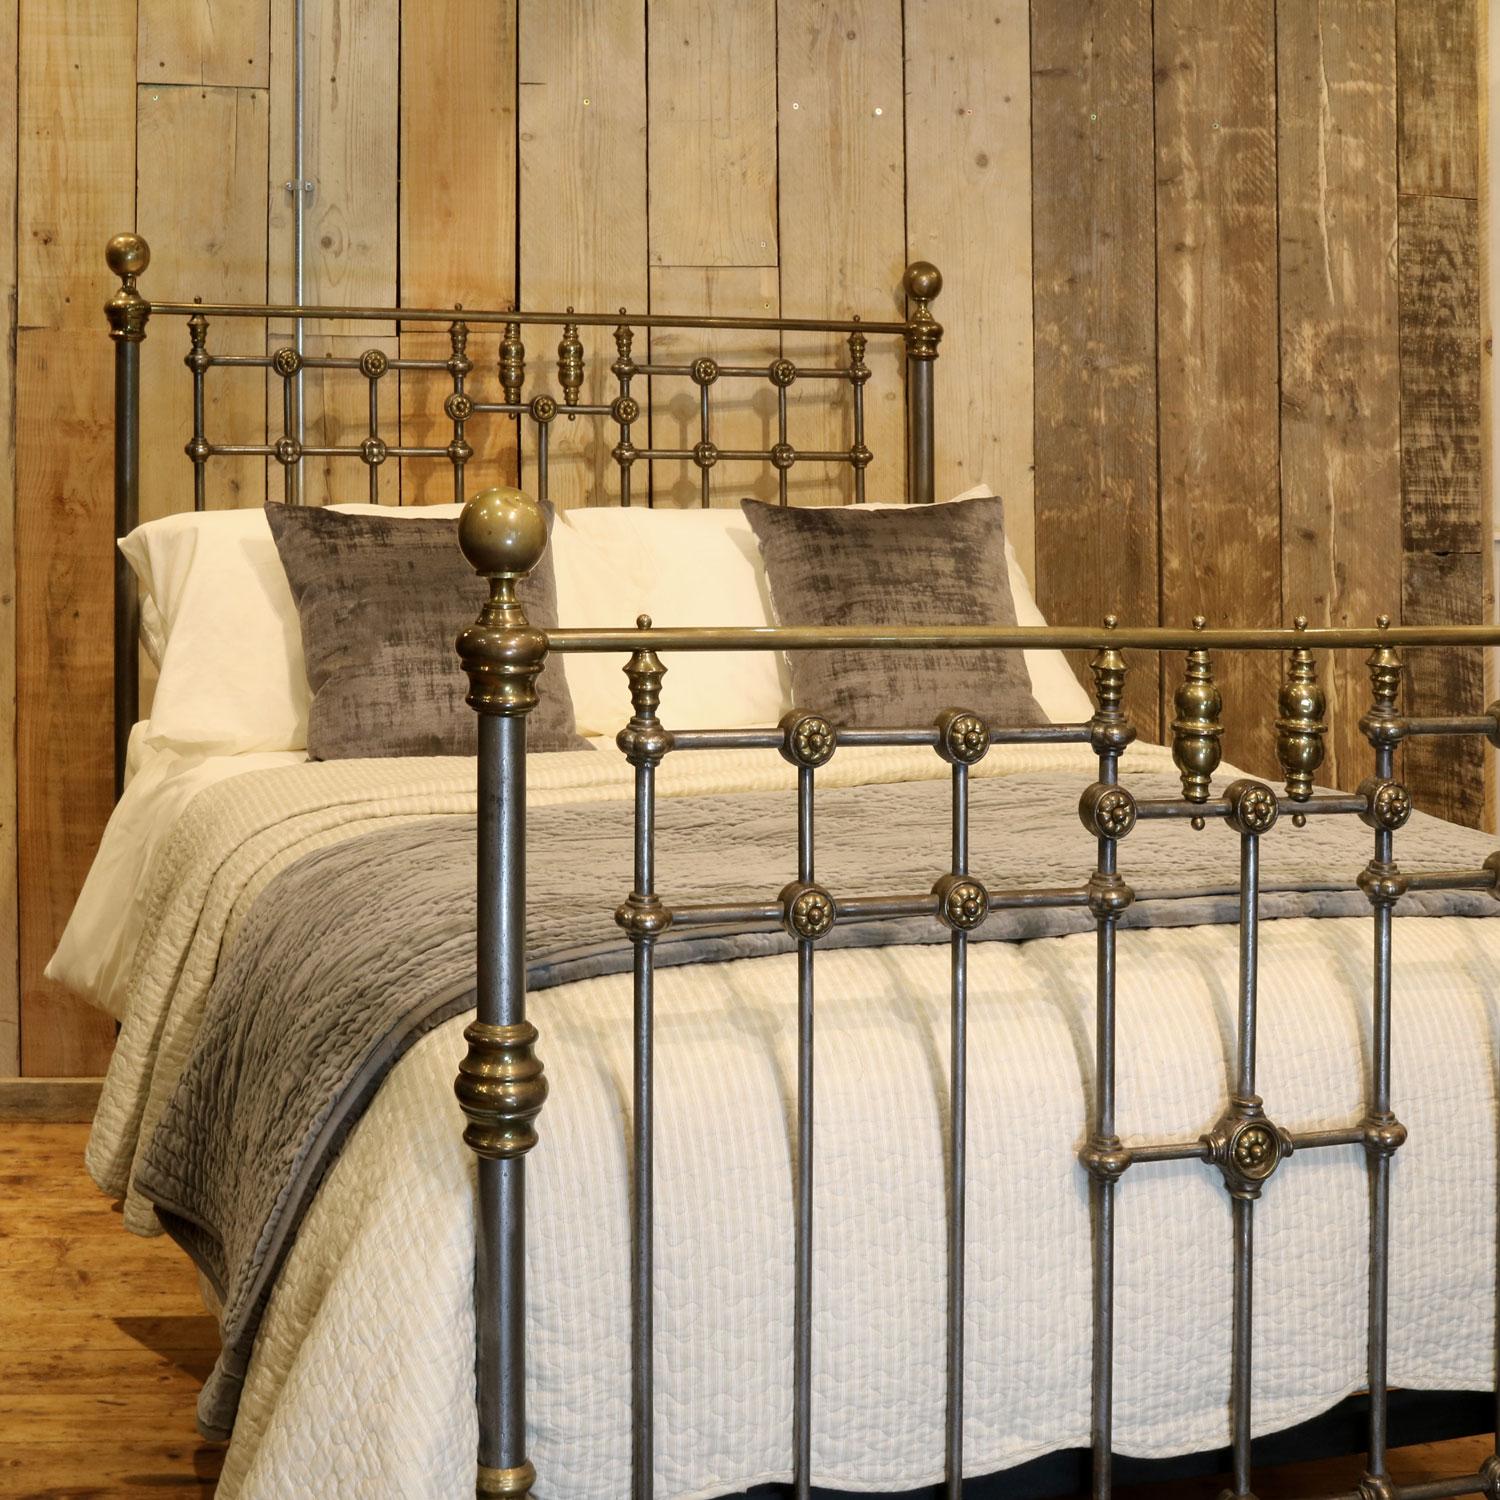 Late Victorian brass and cast iron bedstead with burnished steel finish. The head and foot ends have delicate brass flowers, and the footboard has a lovely central design featuring brass spindles. 

This bed accepts a double size 4ft 6in wide (54